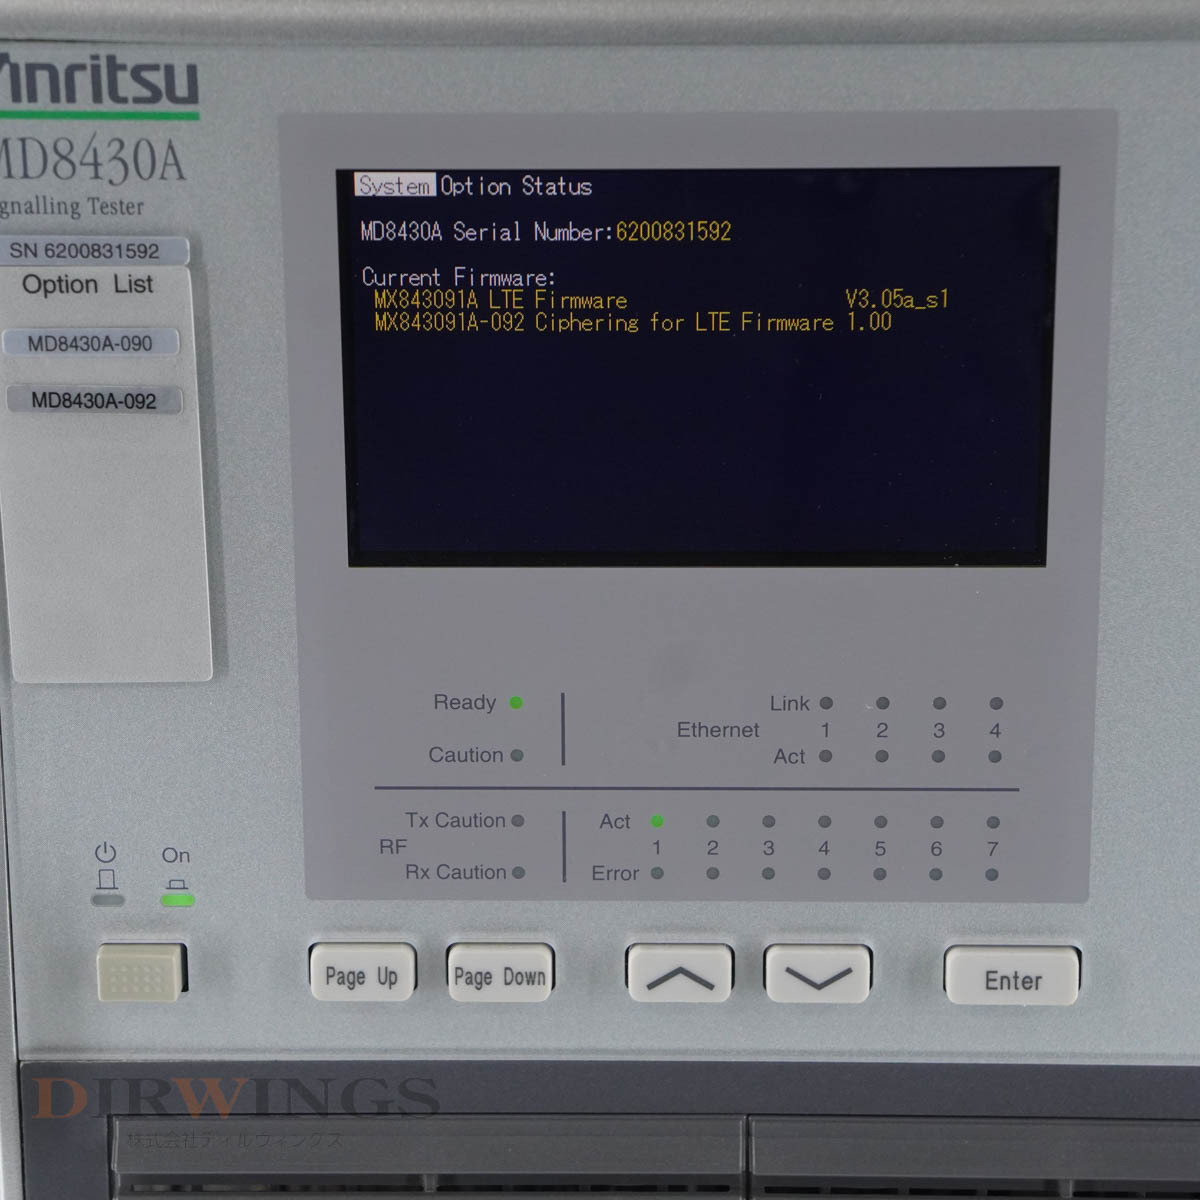 [DW] 8 day guarantee MD8430A Anritsu OPT 090 092 Anne litsuSignalling Testersigna ring tester basis ground department simulator [05899-0054]